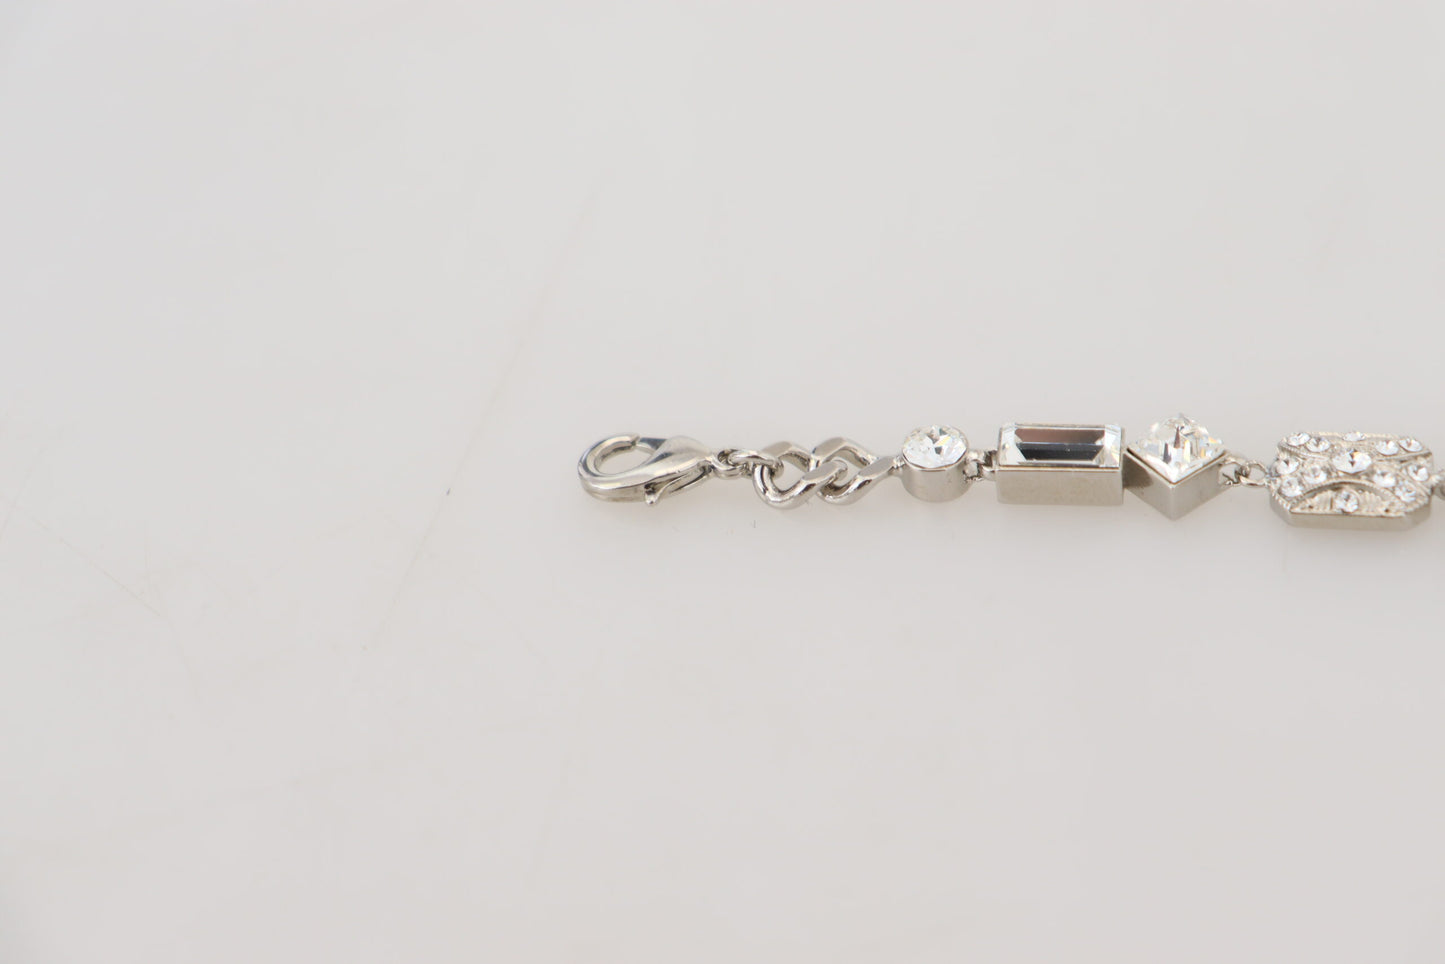 Elegant Silver Chain Bracelet with Glass Accents